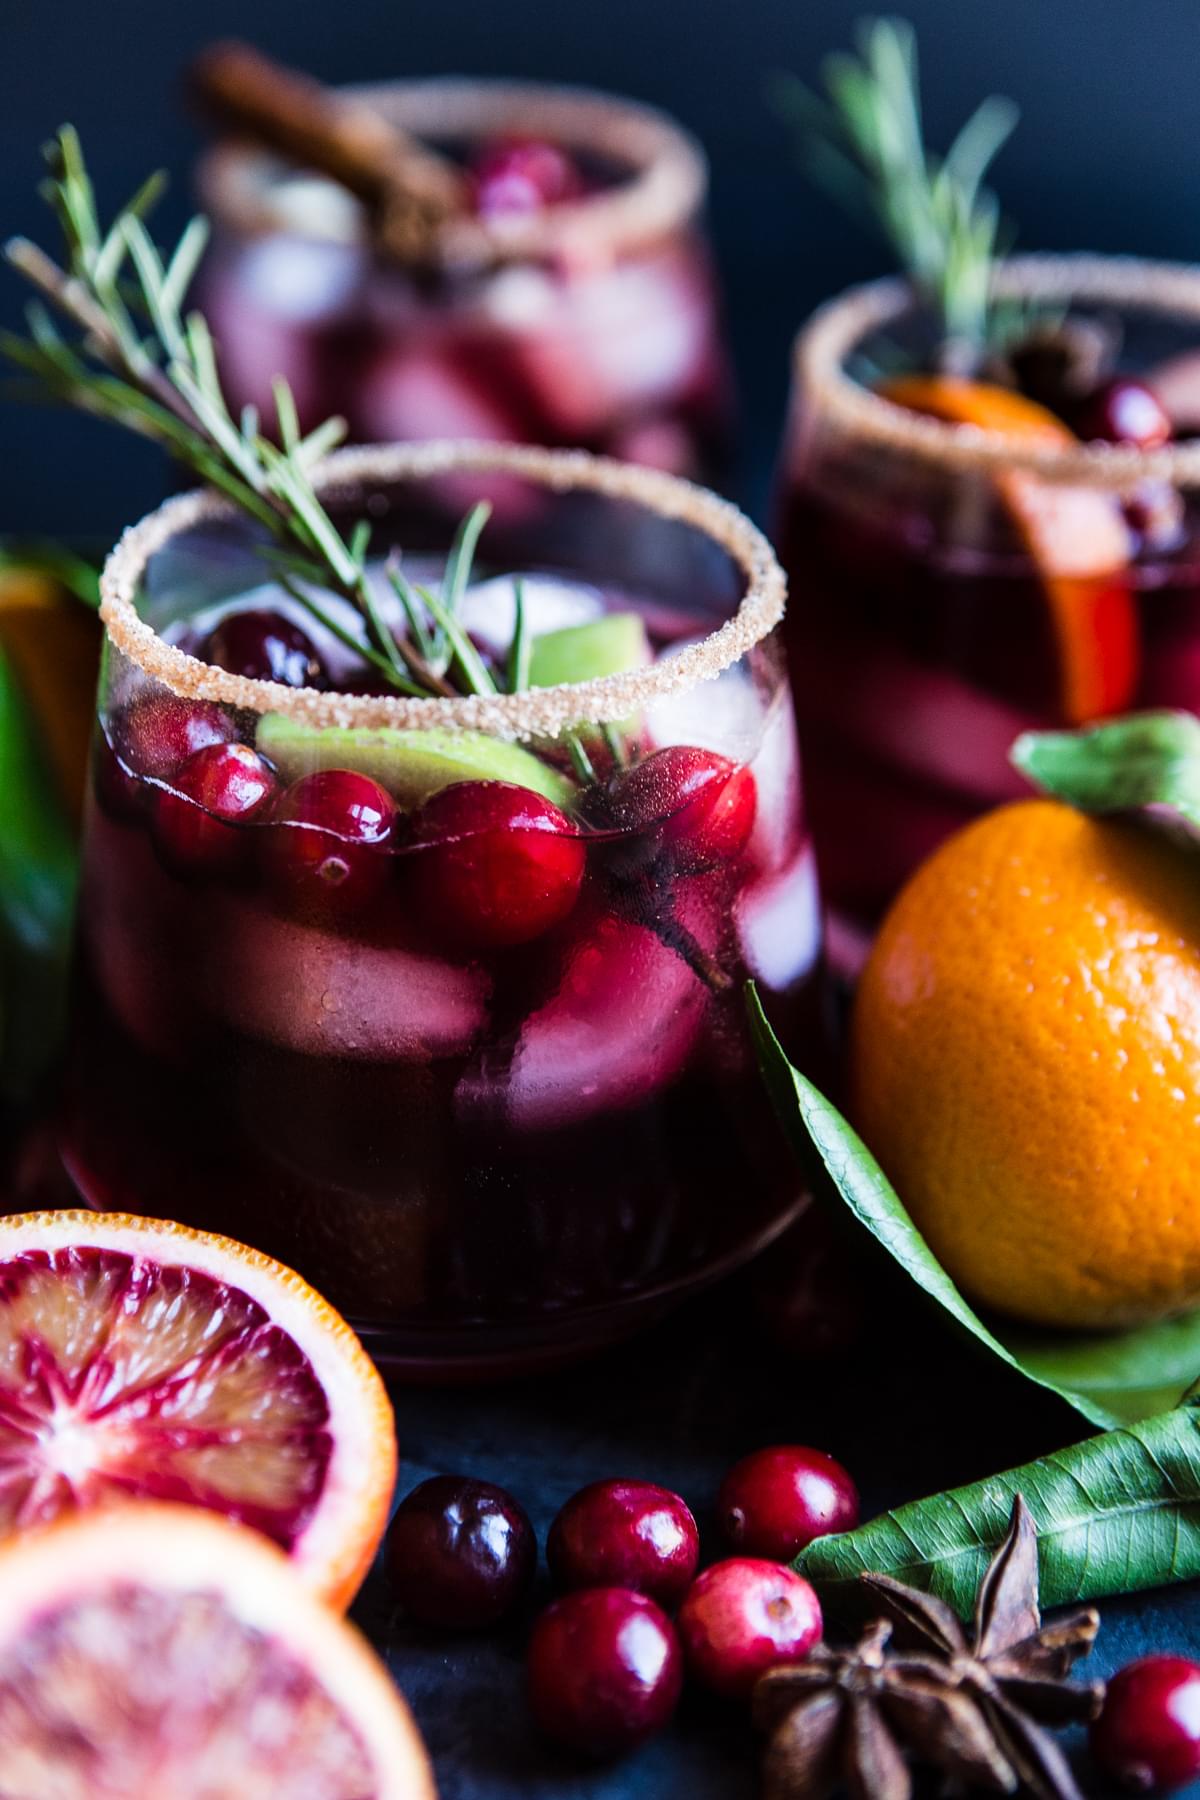 3 glasses filled with red wine sangria made with cranberries, apples, oranges, cinnamon and brandy garnished with rosemary